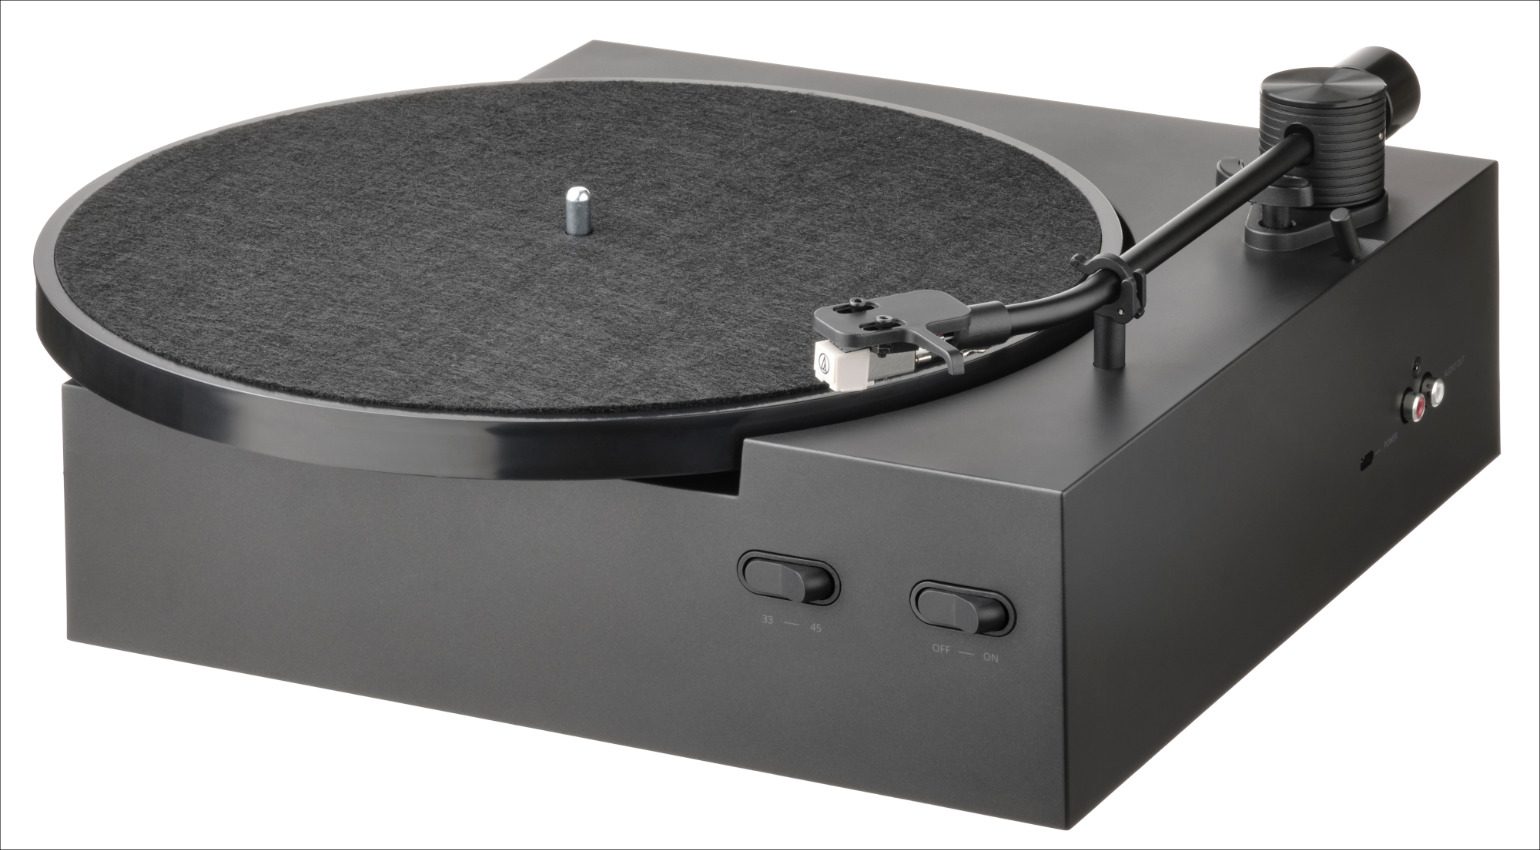 The OBEGRÄNSAD record player is compatible with the IKEA ENEBY Bluetooth speaker.